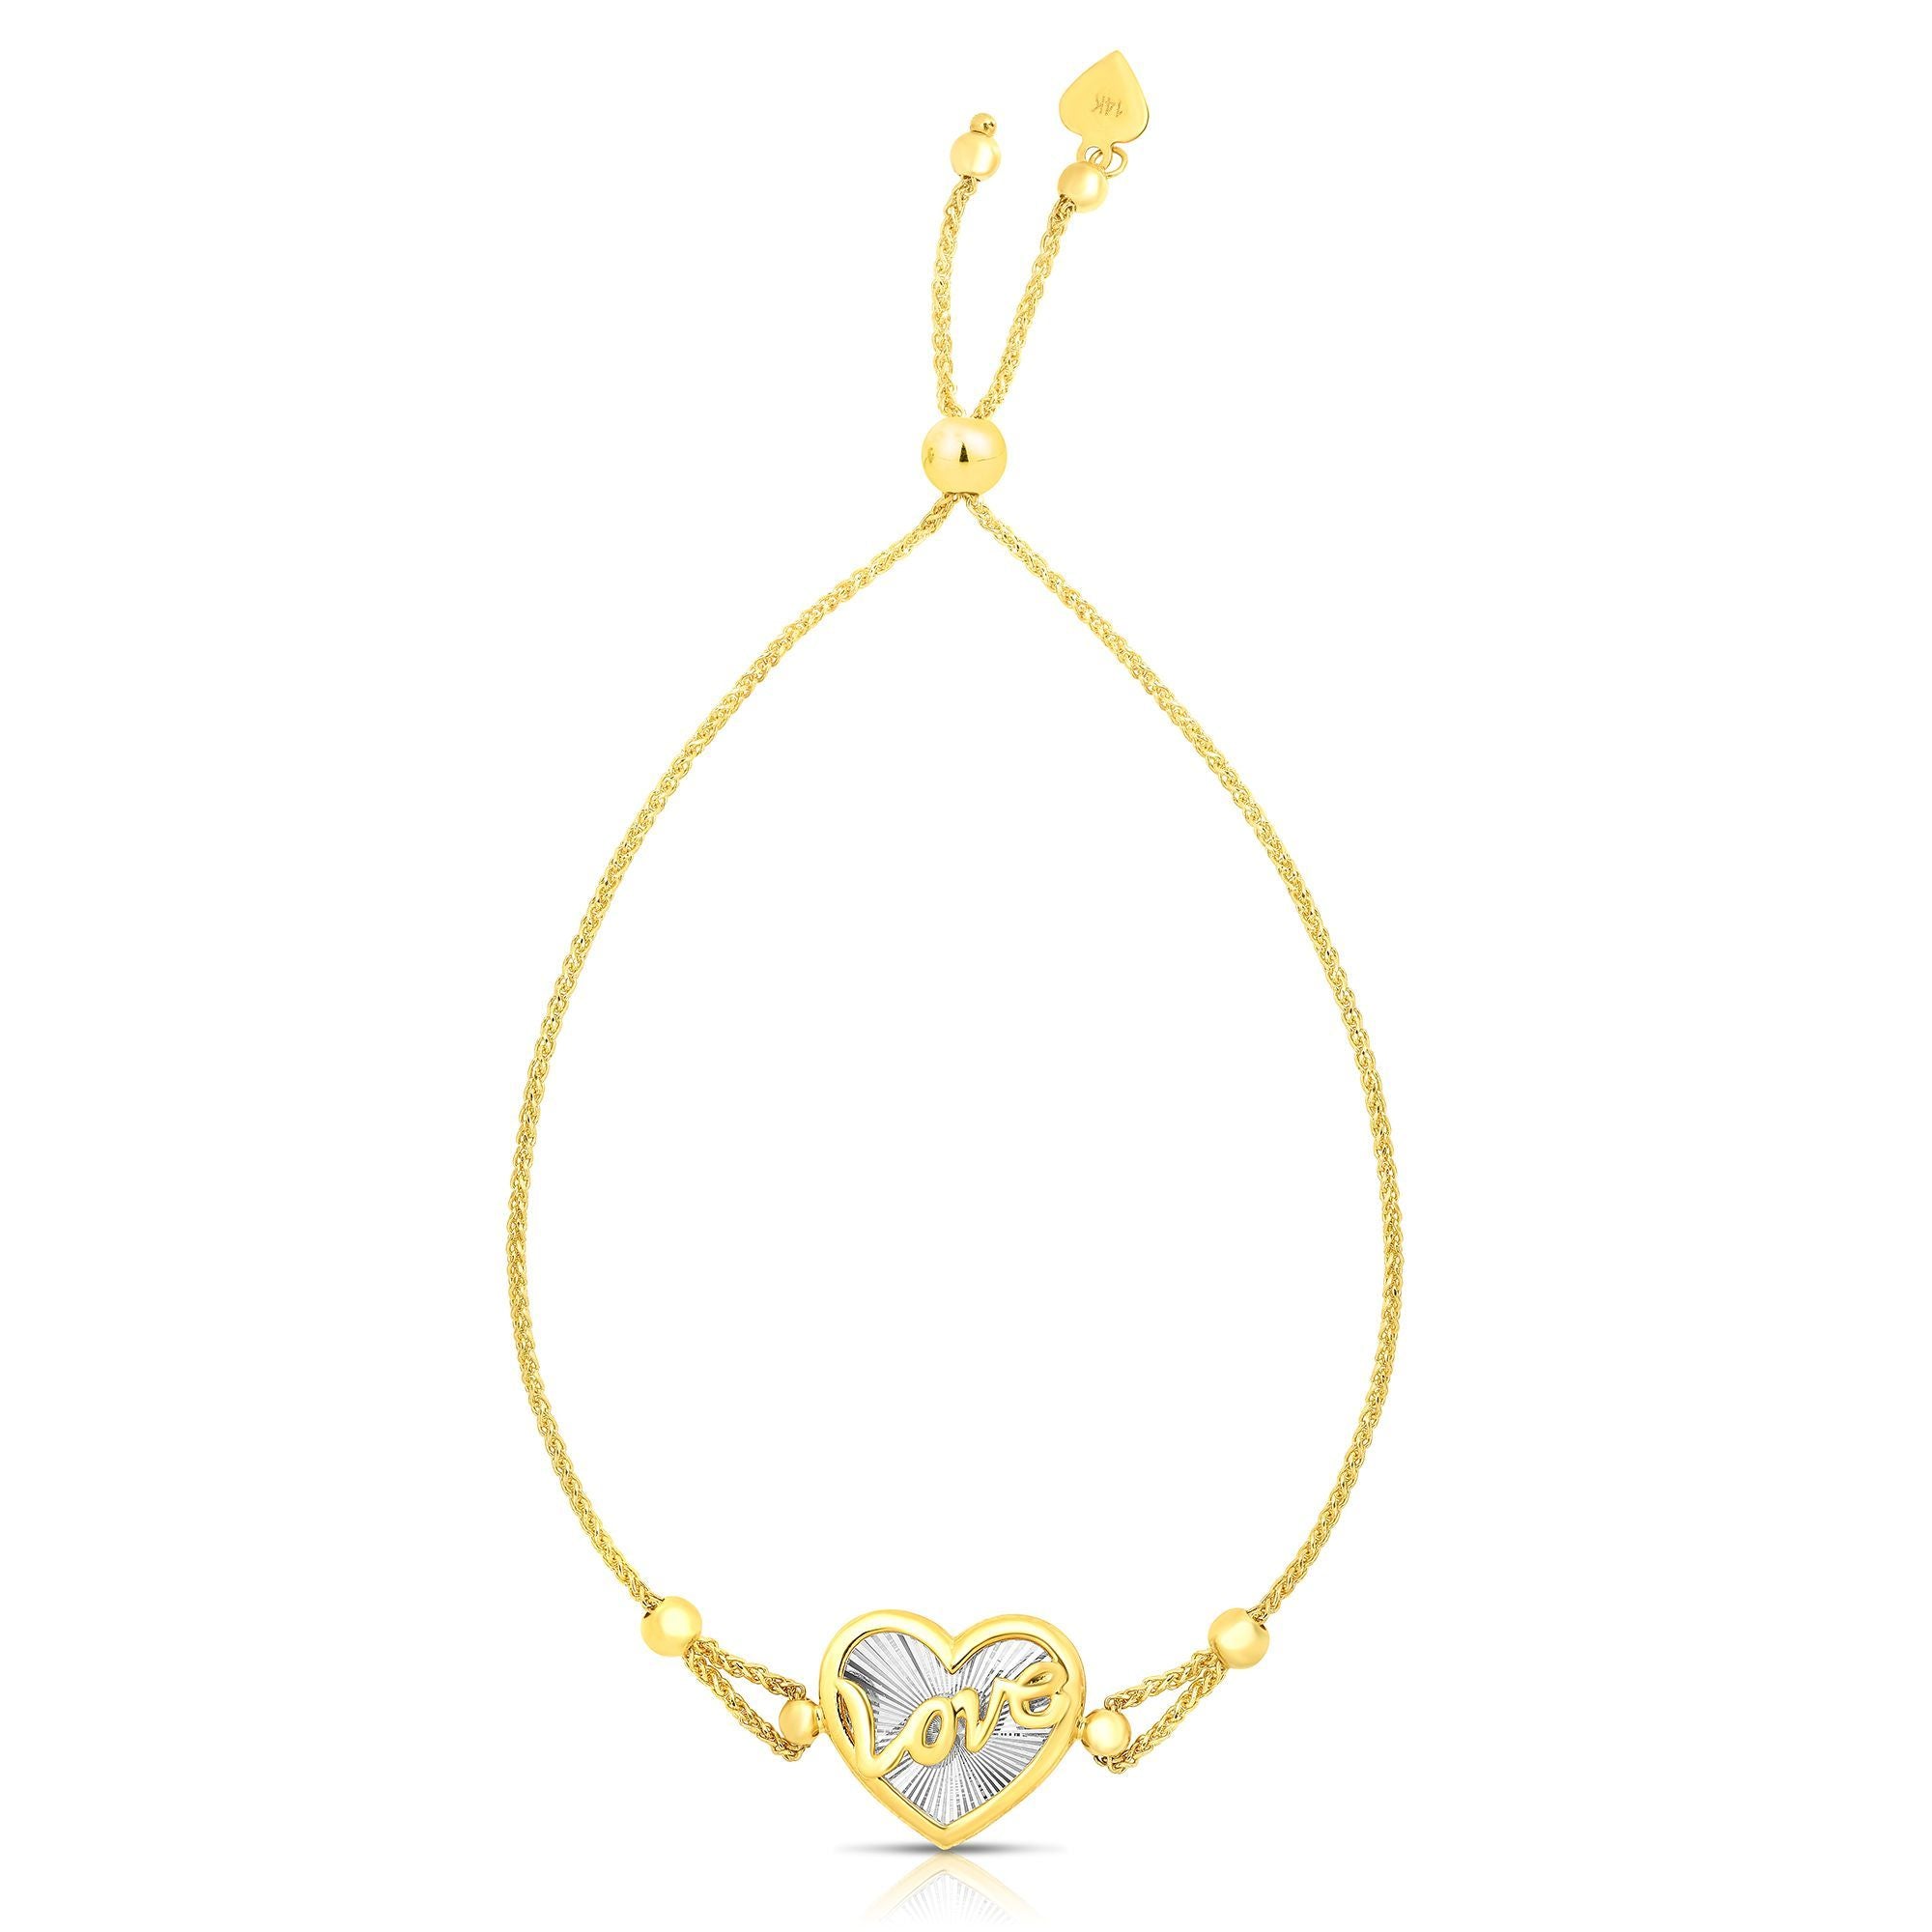 14k Yellow And White Gold Heart Love Charm Adjustable Bracelet, 9.25"